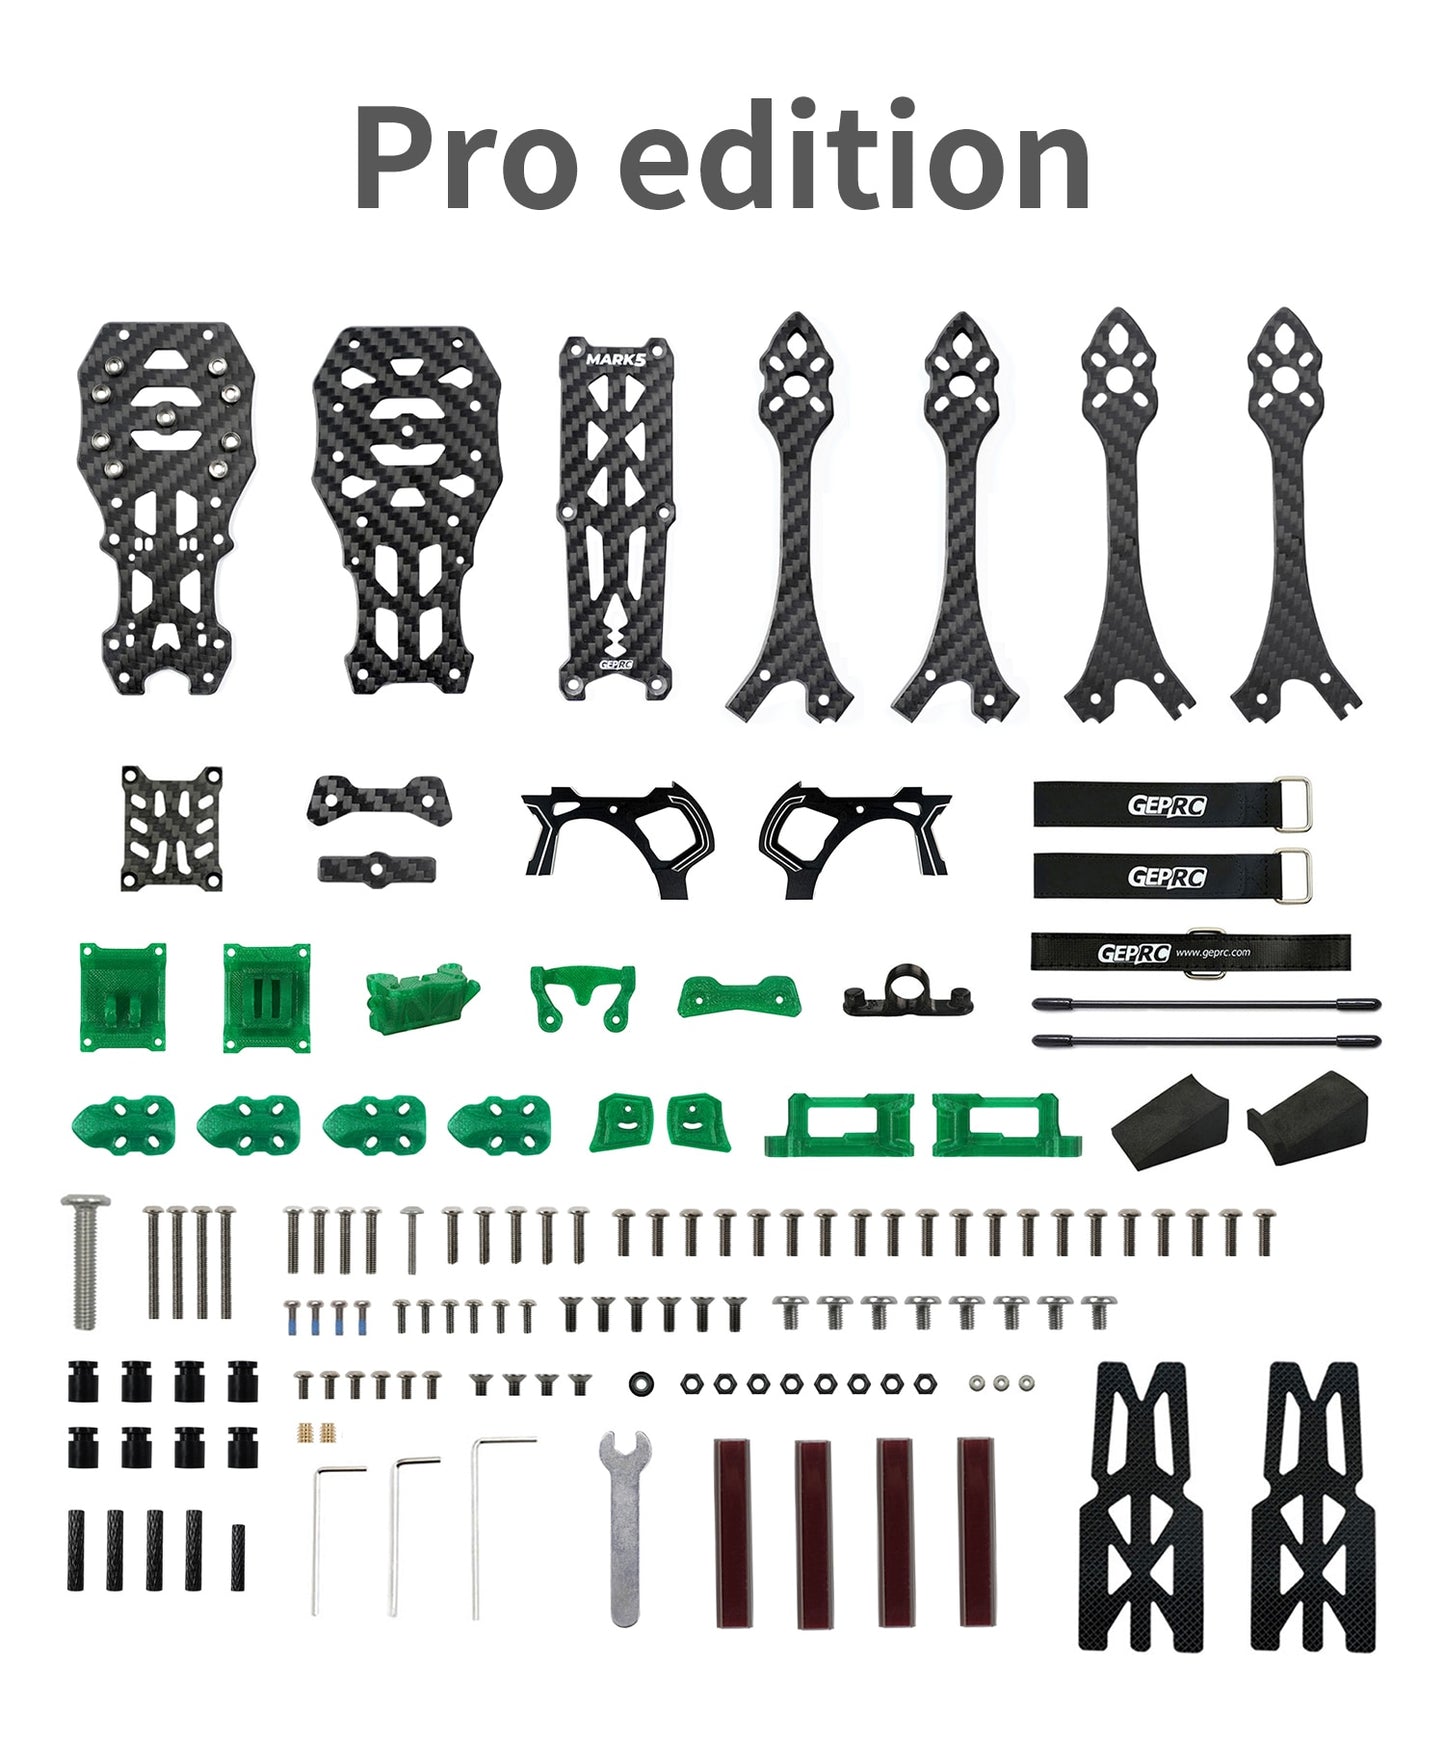 pro edition MARKS Kaaa_ GEPRC 0 2rGr G